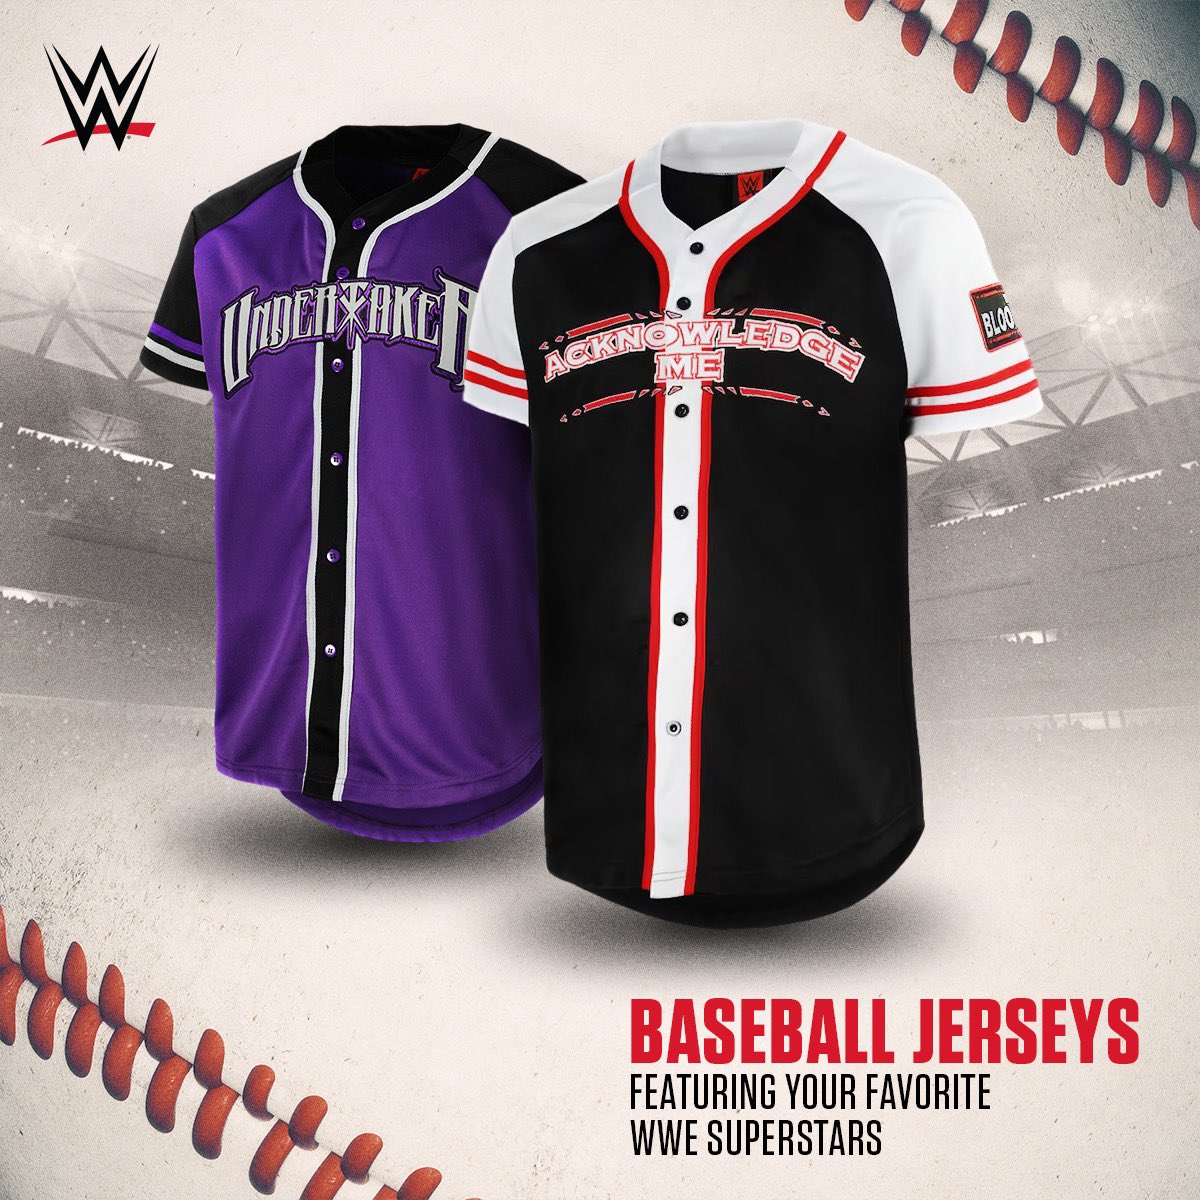 WWE Superstar Baseball Jerseys are perfect for your next BBQ or beach day! Find your favorite Superstar at #WWEShop! #WWE

🛒: bit.ly/3p4p6na